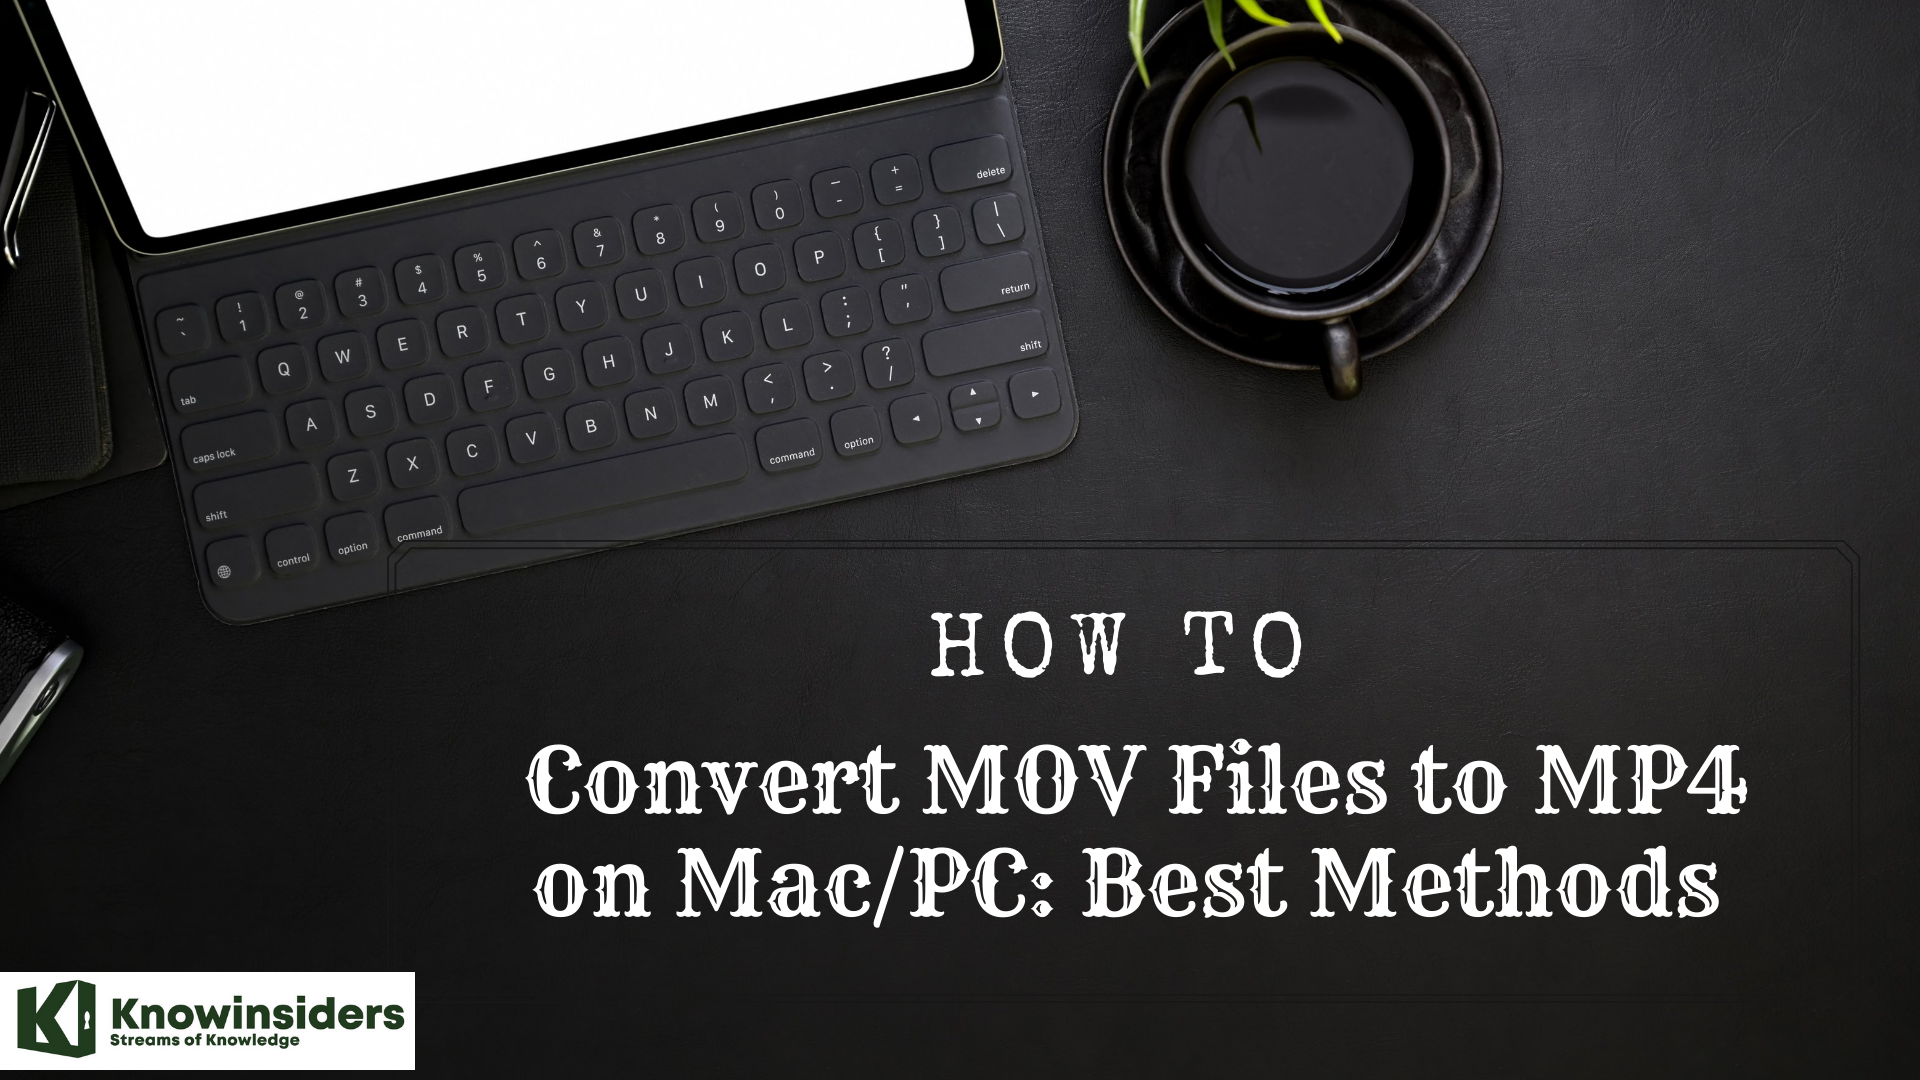 The Best Ways to Convert MOV Files to MP4 on Mac/PC